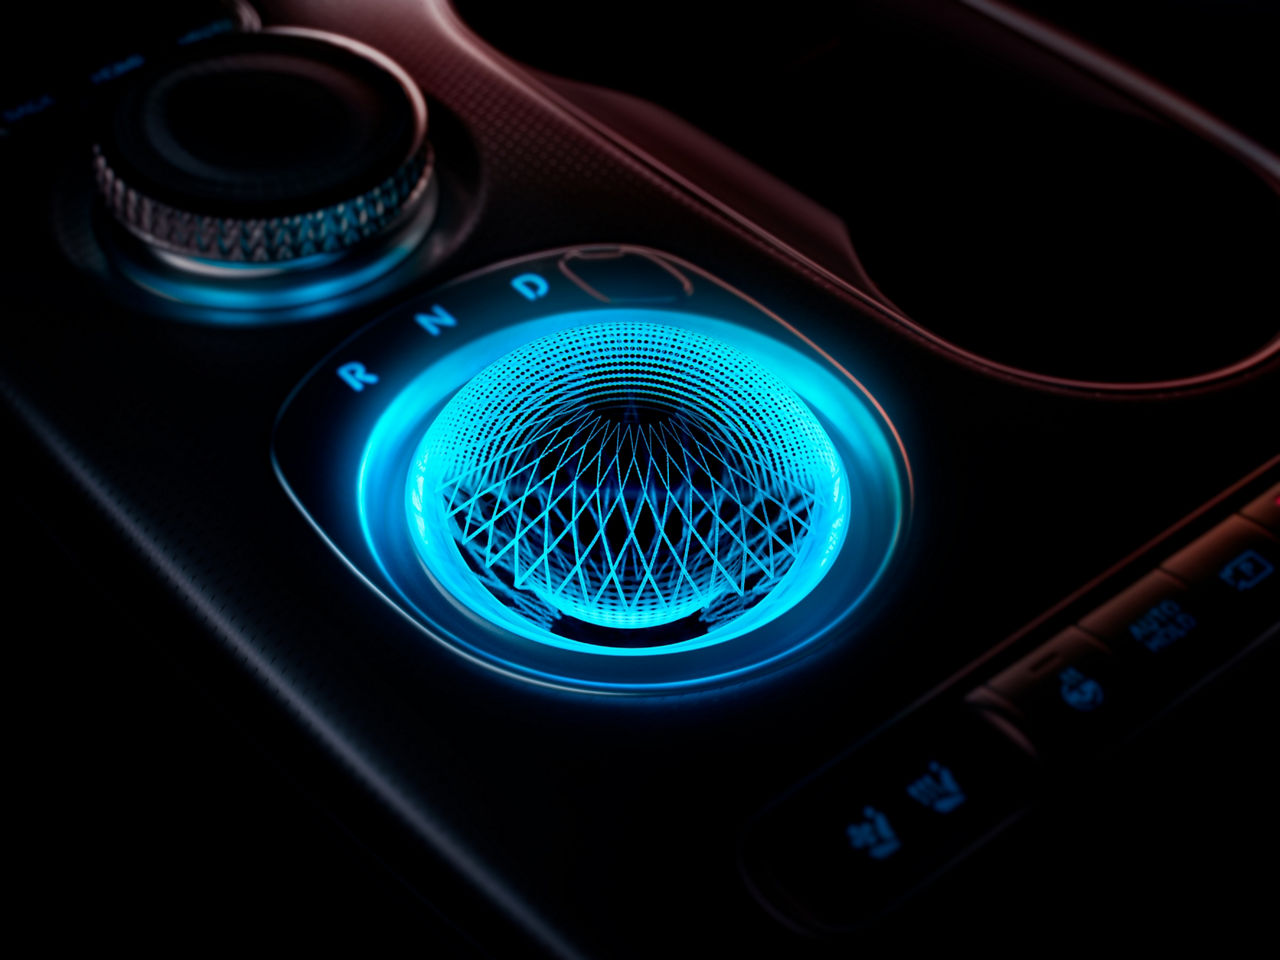 Spherical blue illuminated control element in the centre console of a car